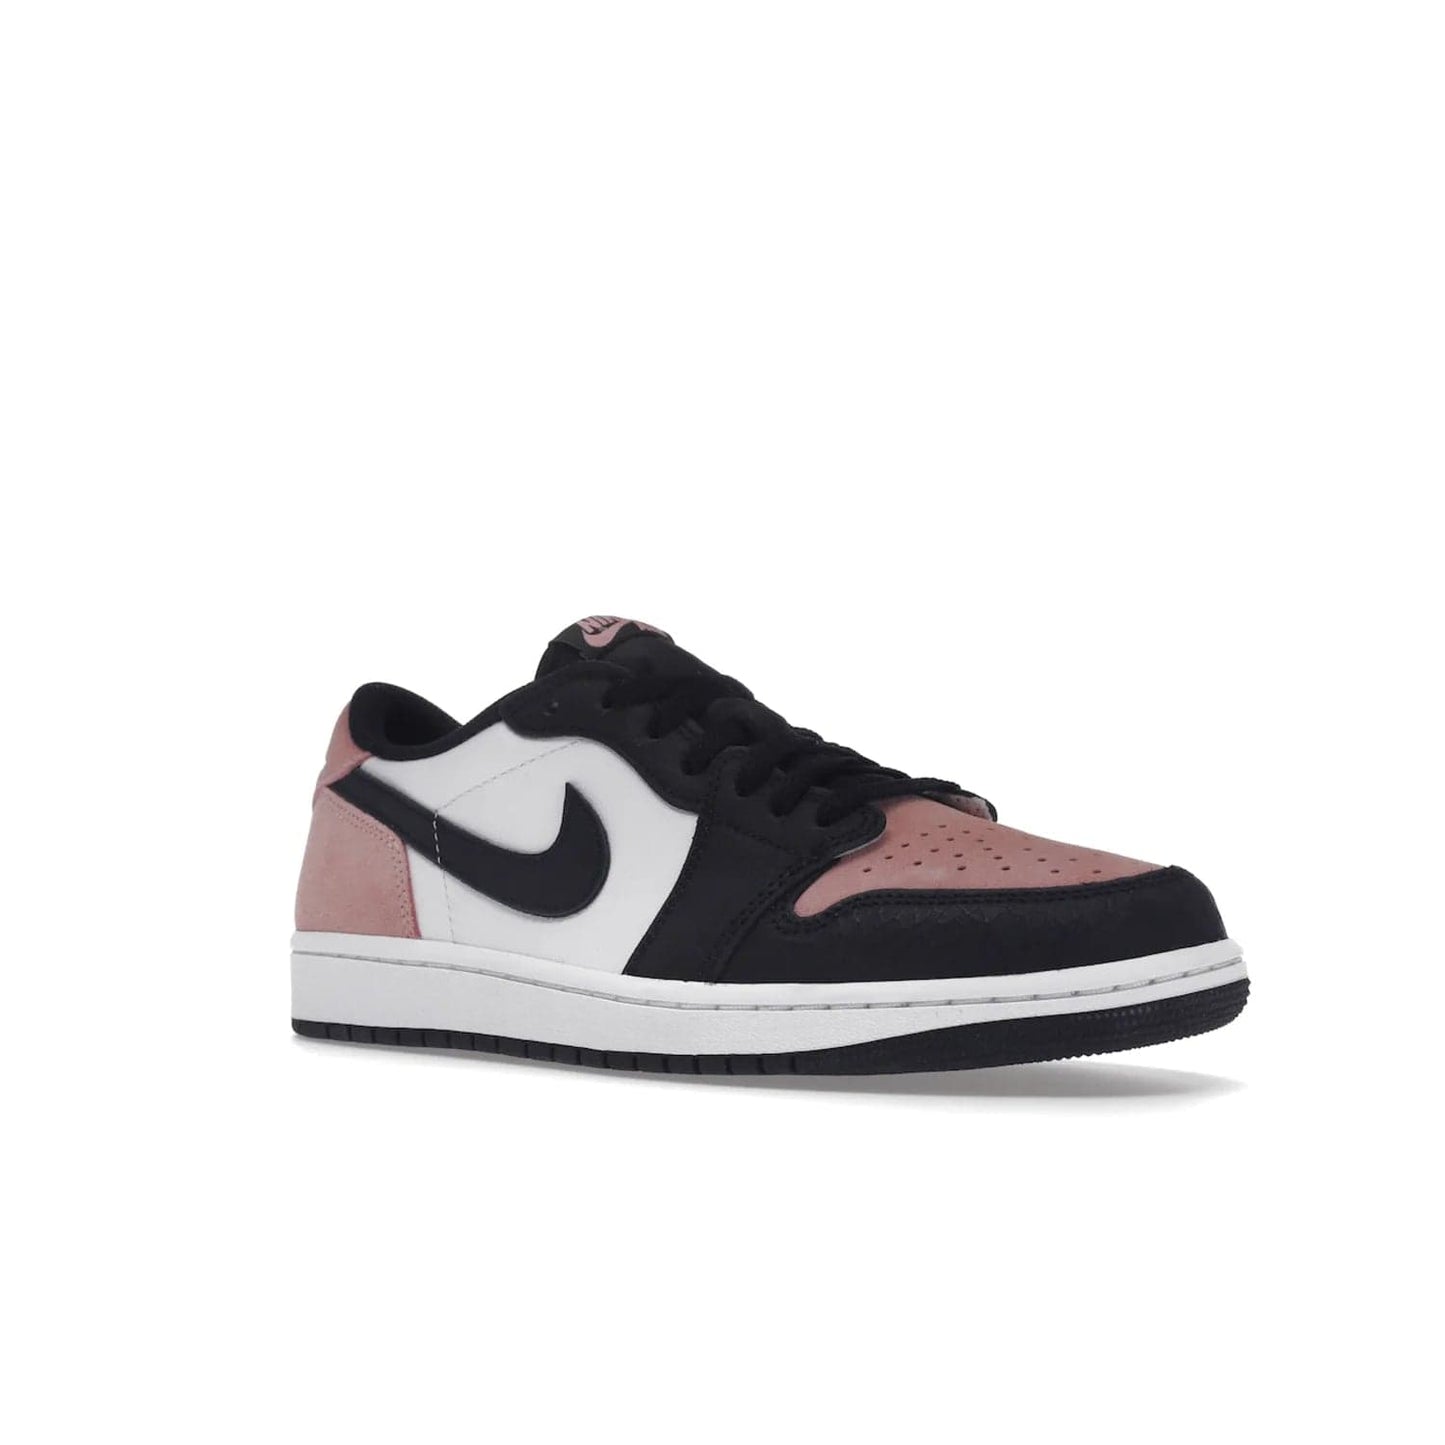 Jordan 1 Low OG Bleached Coral - Image 5 - Only at www.BallersClubKickz.com - Introducing the Air Jordan 1 Low OG Bleached Coral. Constructed with white leather, black cracked leather & Bleached Coral suede. Signature Jordan Wings logo, white Air sole. Get the pack in July 2022 and stand out.